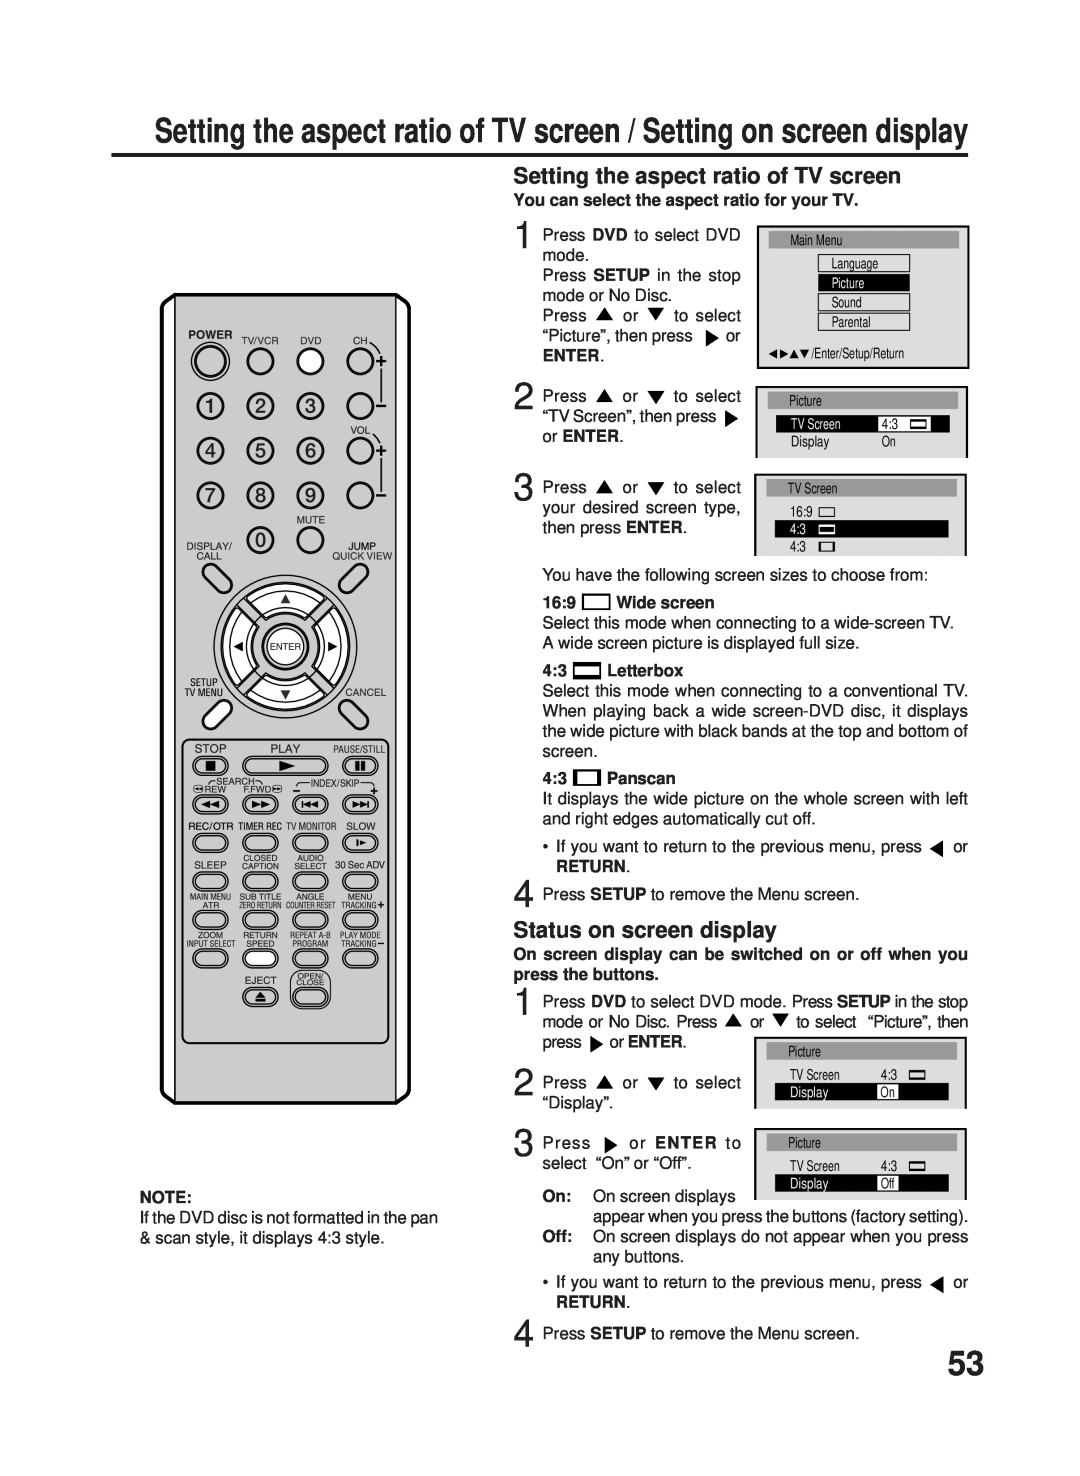 RCA 27F500TDV Setting the aspect ratio of TV screen, Status on screen display, You can select the aspect ratio for your TV 